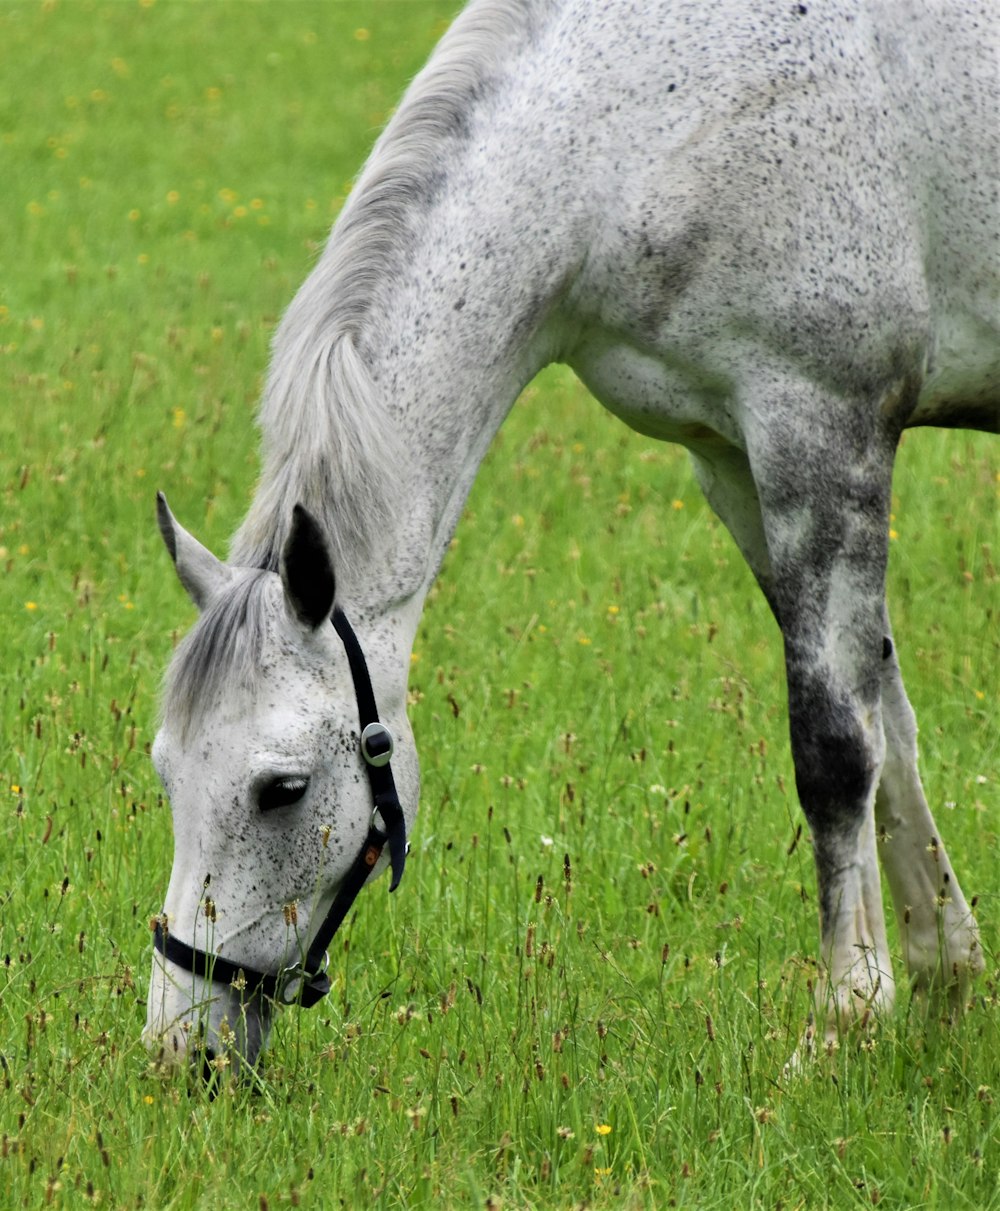 white horse eating grass on green grass field during daytime